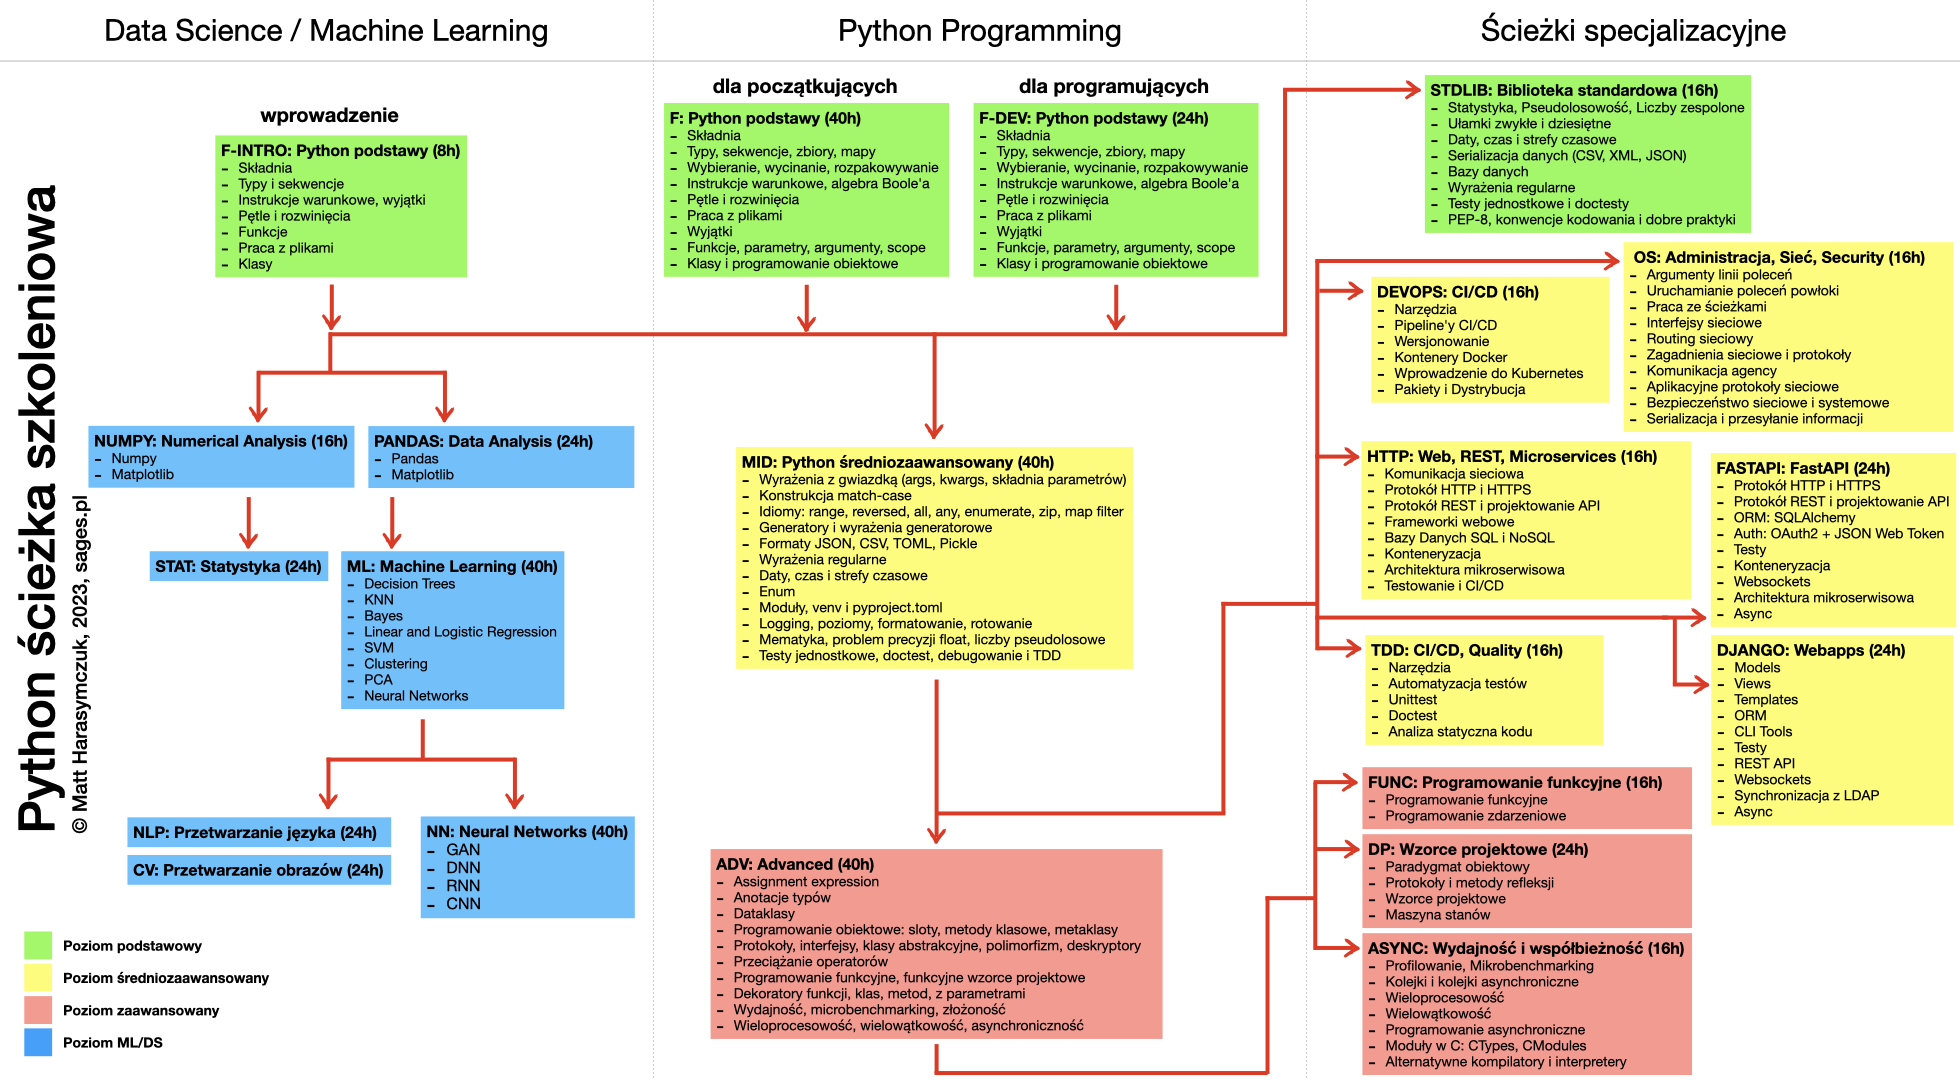 _images/python-training-path.png